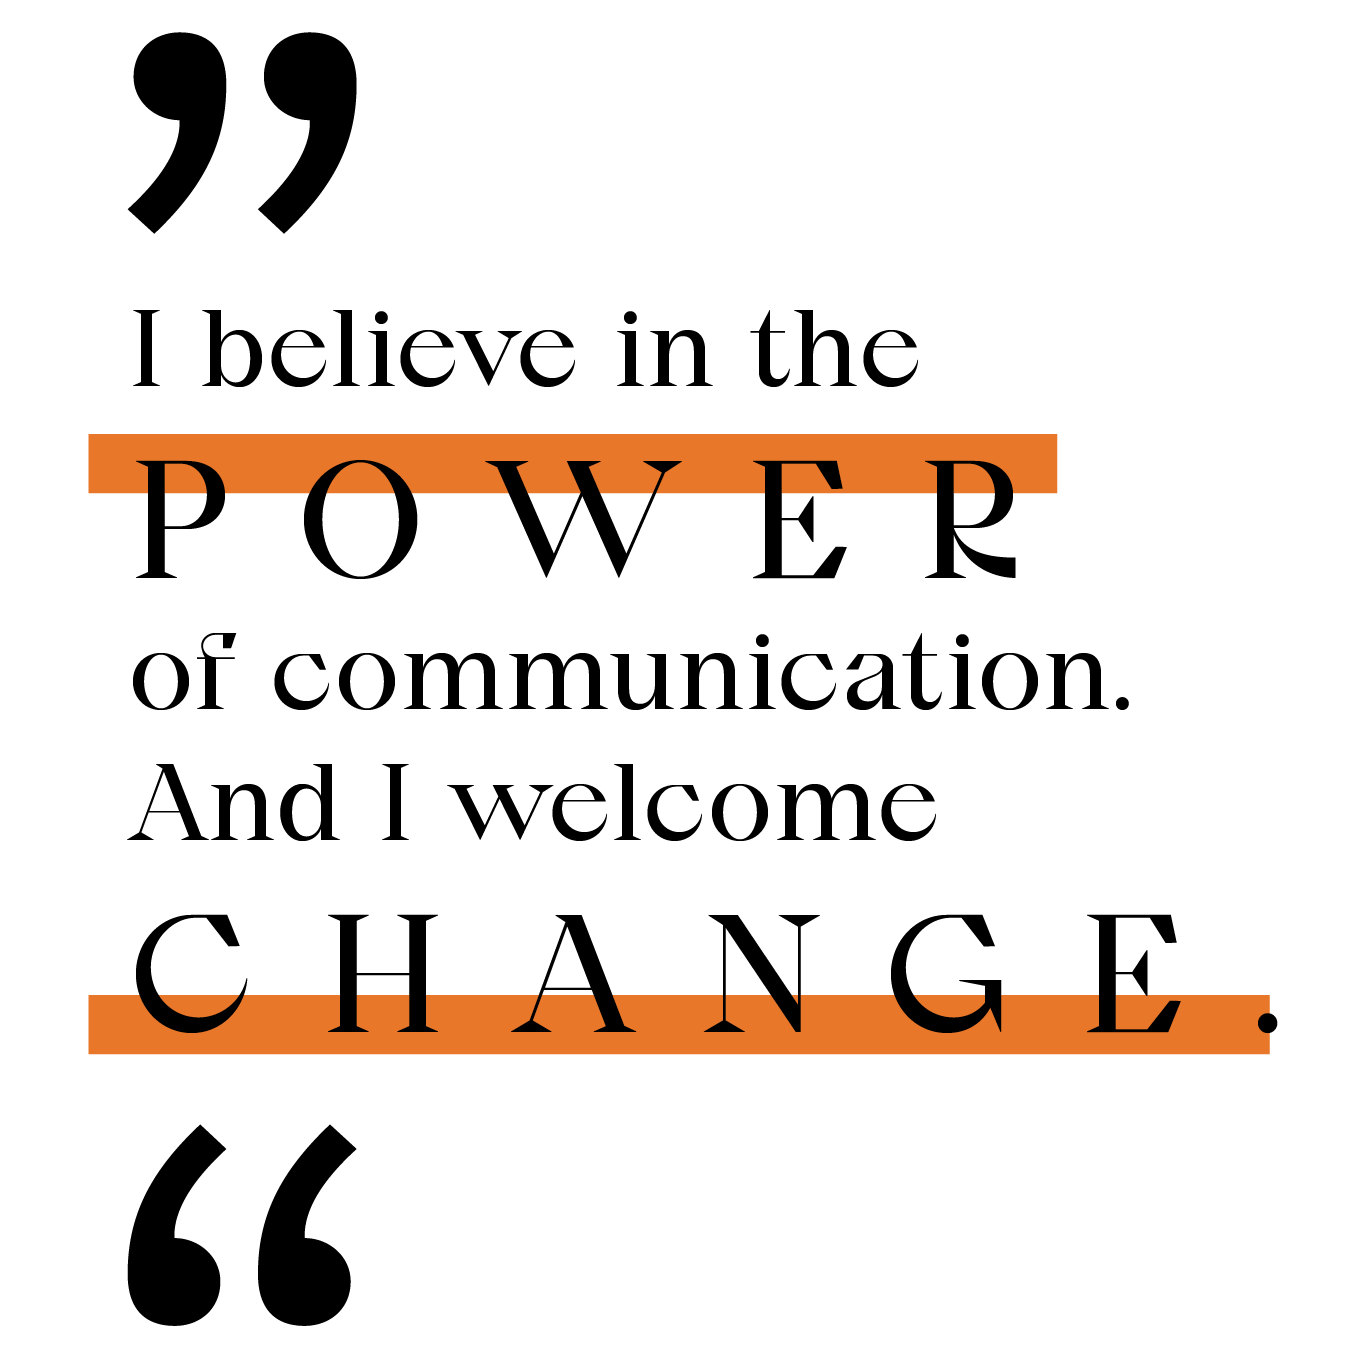 Quote: I believe in the power of communication and I welcome change.